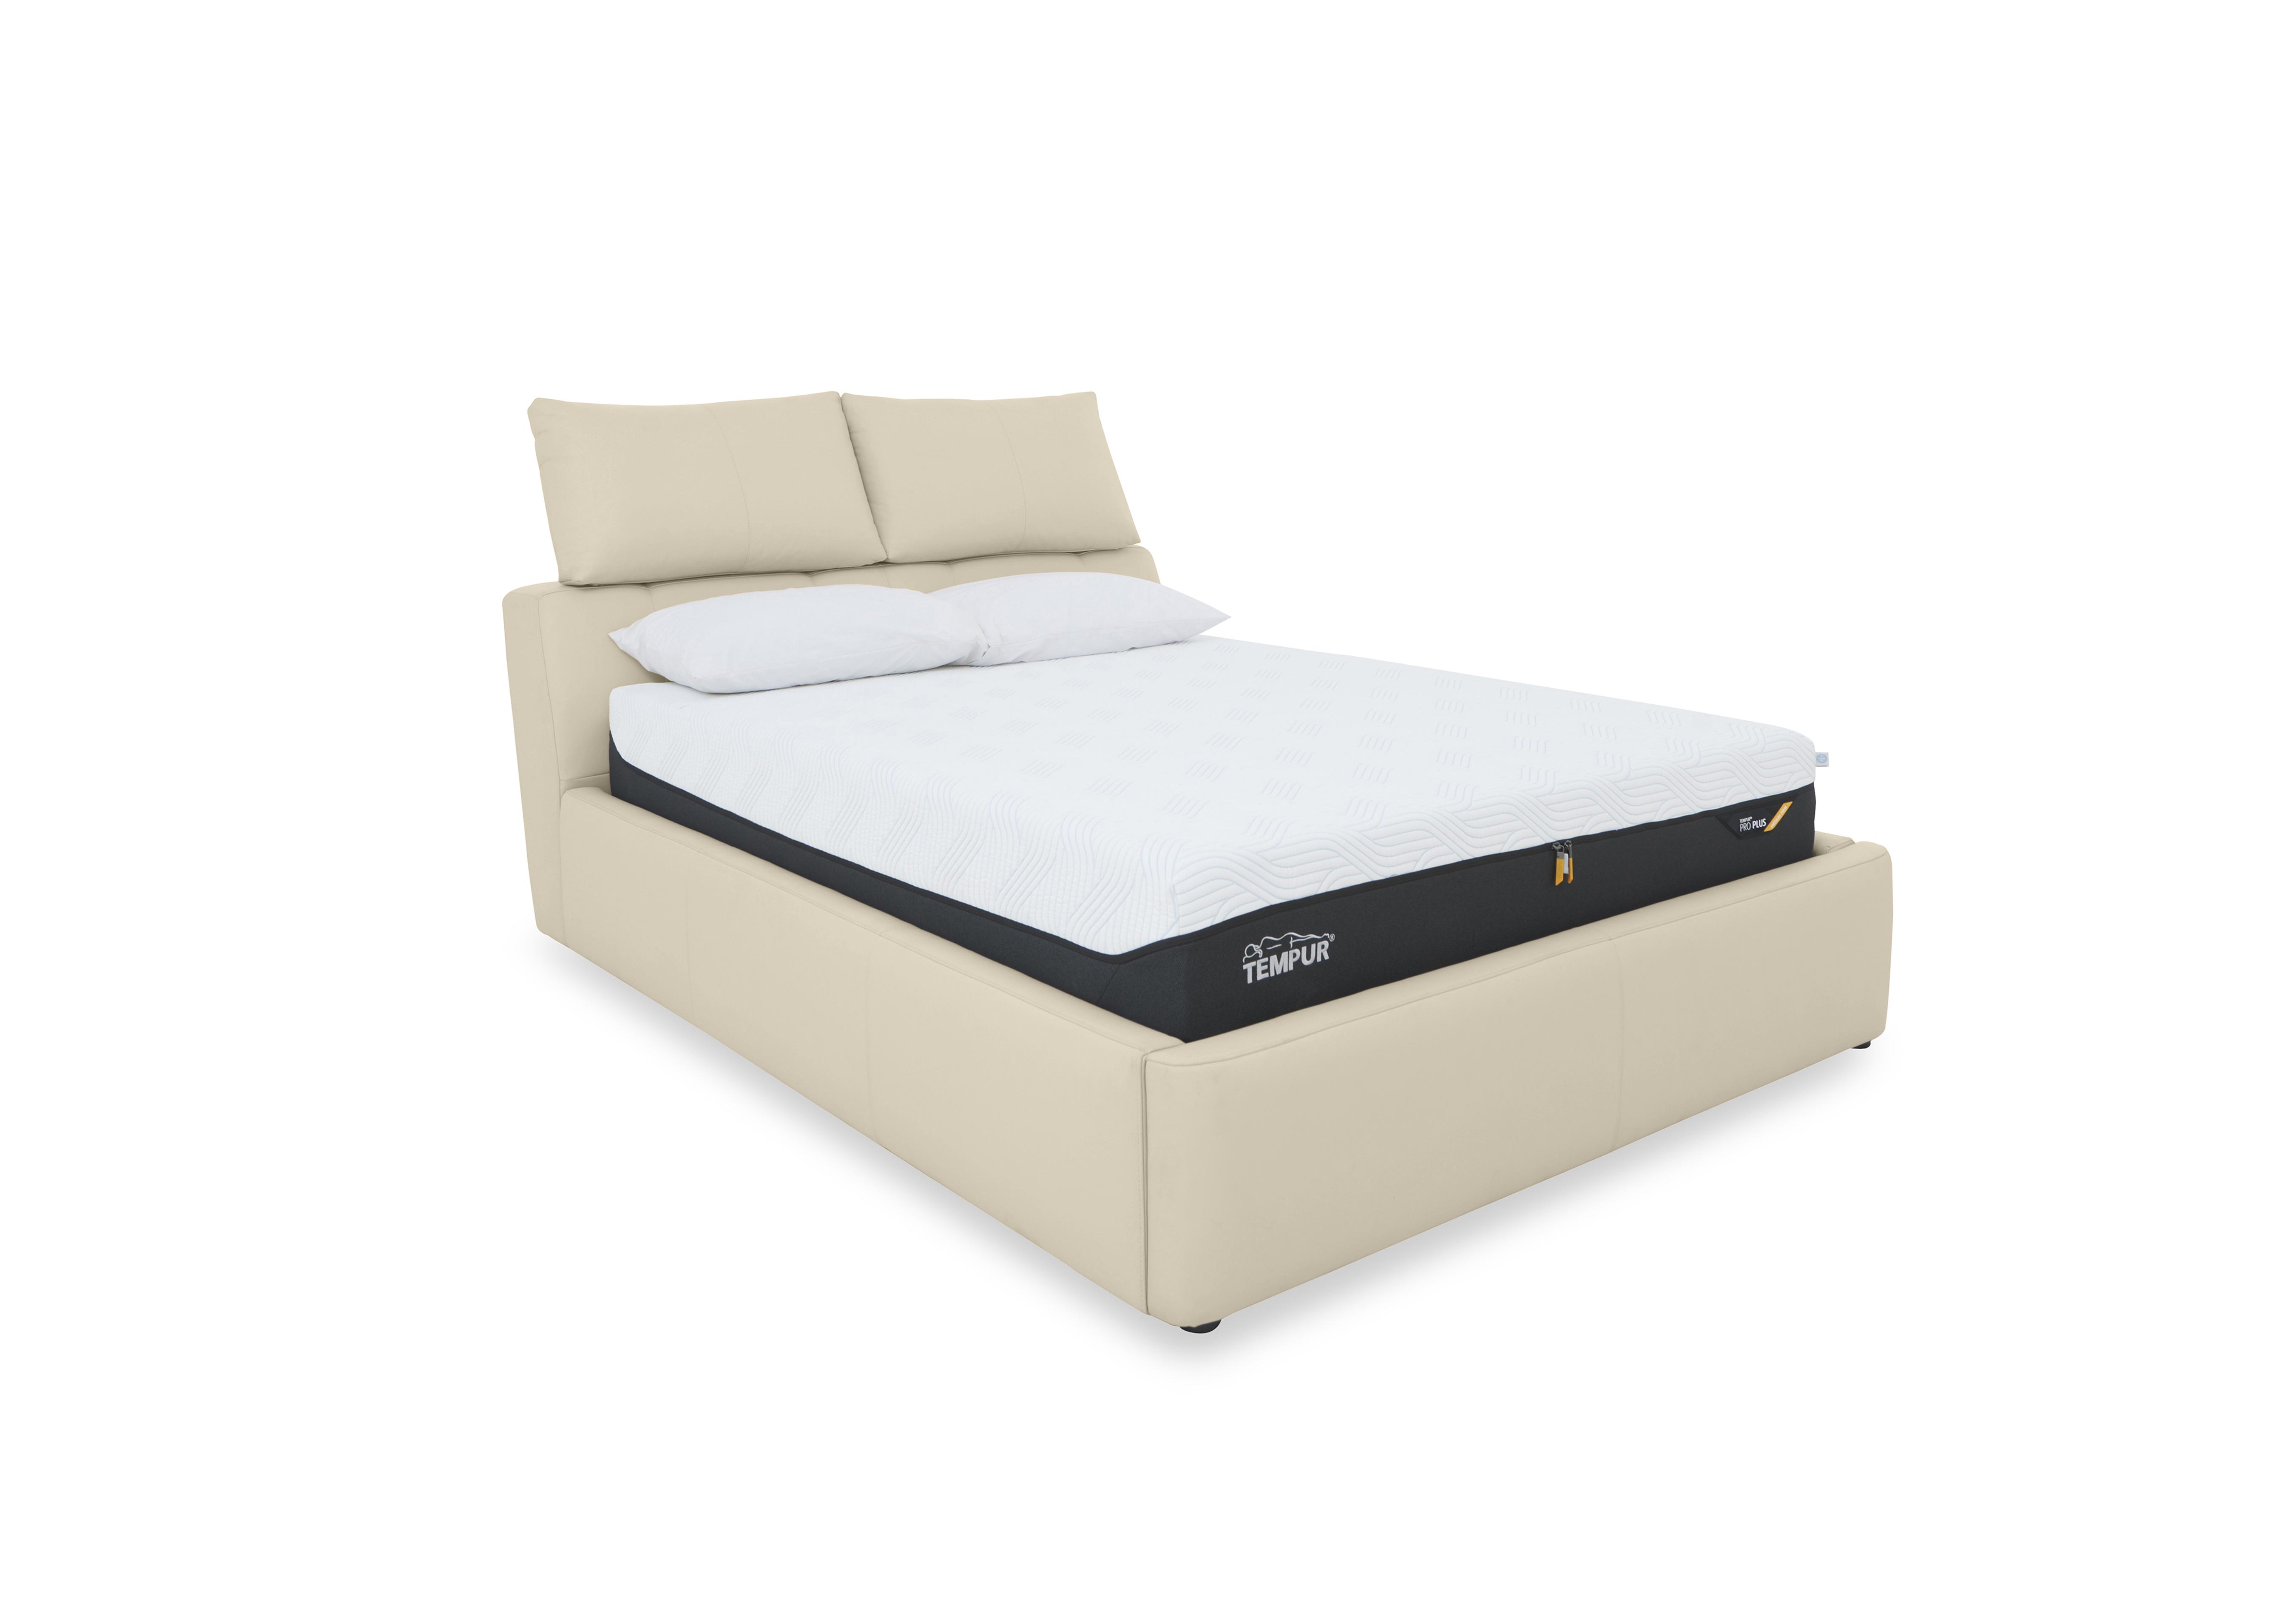 Tyrell Leather Manual Ottoman Bed Frame in Bv-862c Bisque on Furniture Village